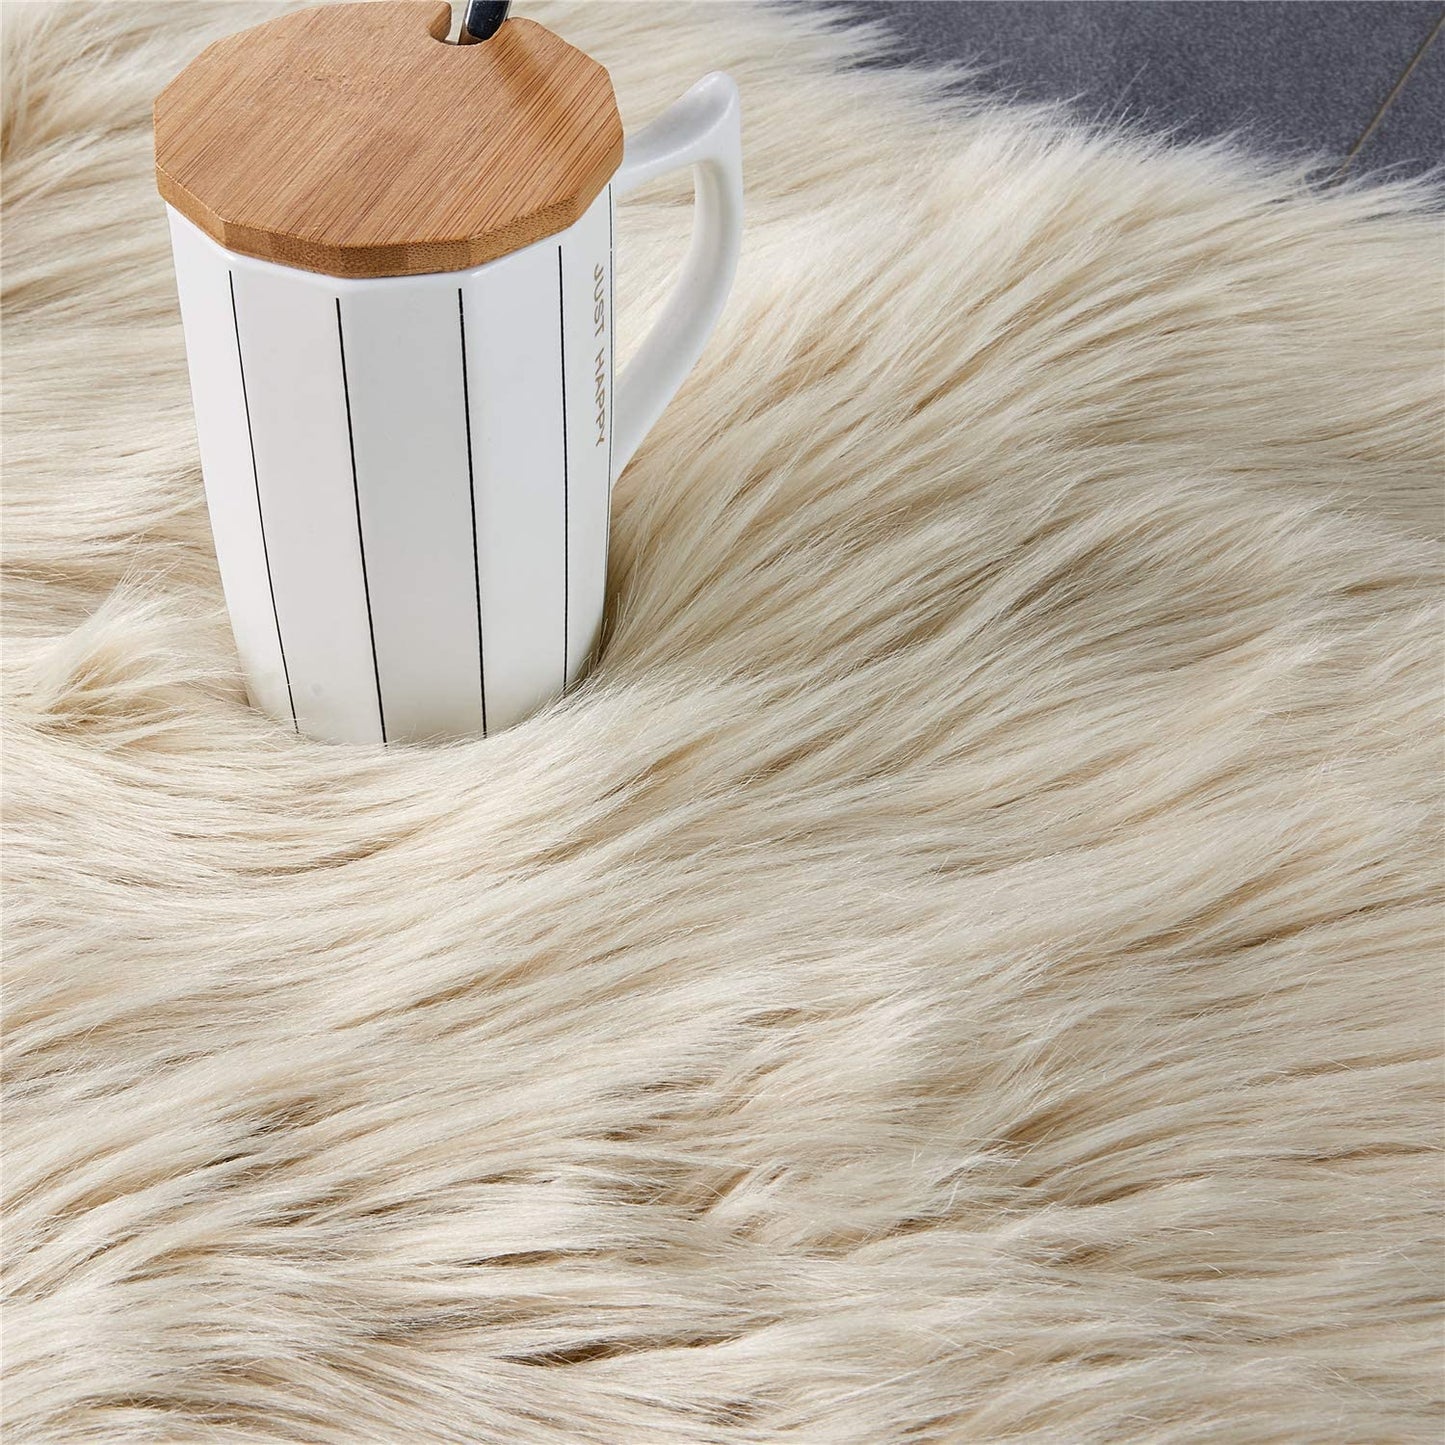 Ultra Soft Fluffy/Fuzzy Shaggy Area Rug Faux Fur Chair Cover Seat Pad for Bedroom Floor Sofa Living Room (2 X 6 Ft Sheepskin, Beige)